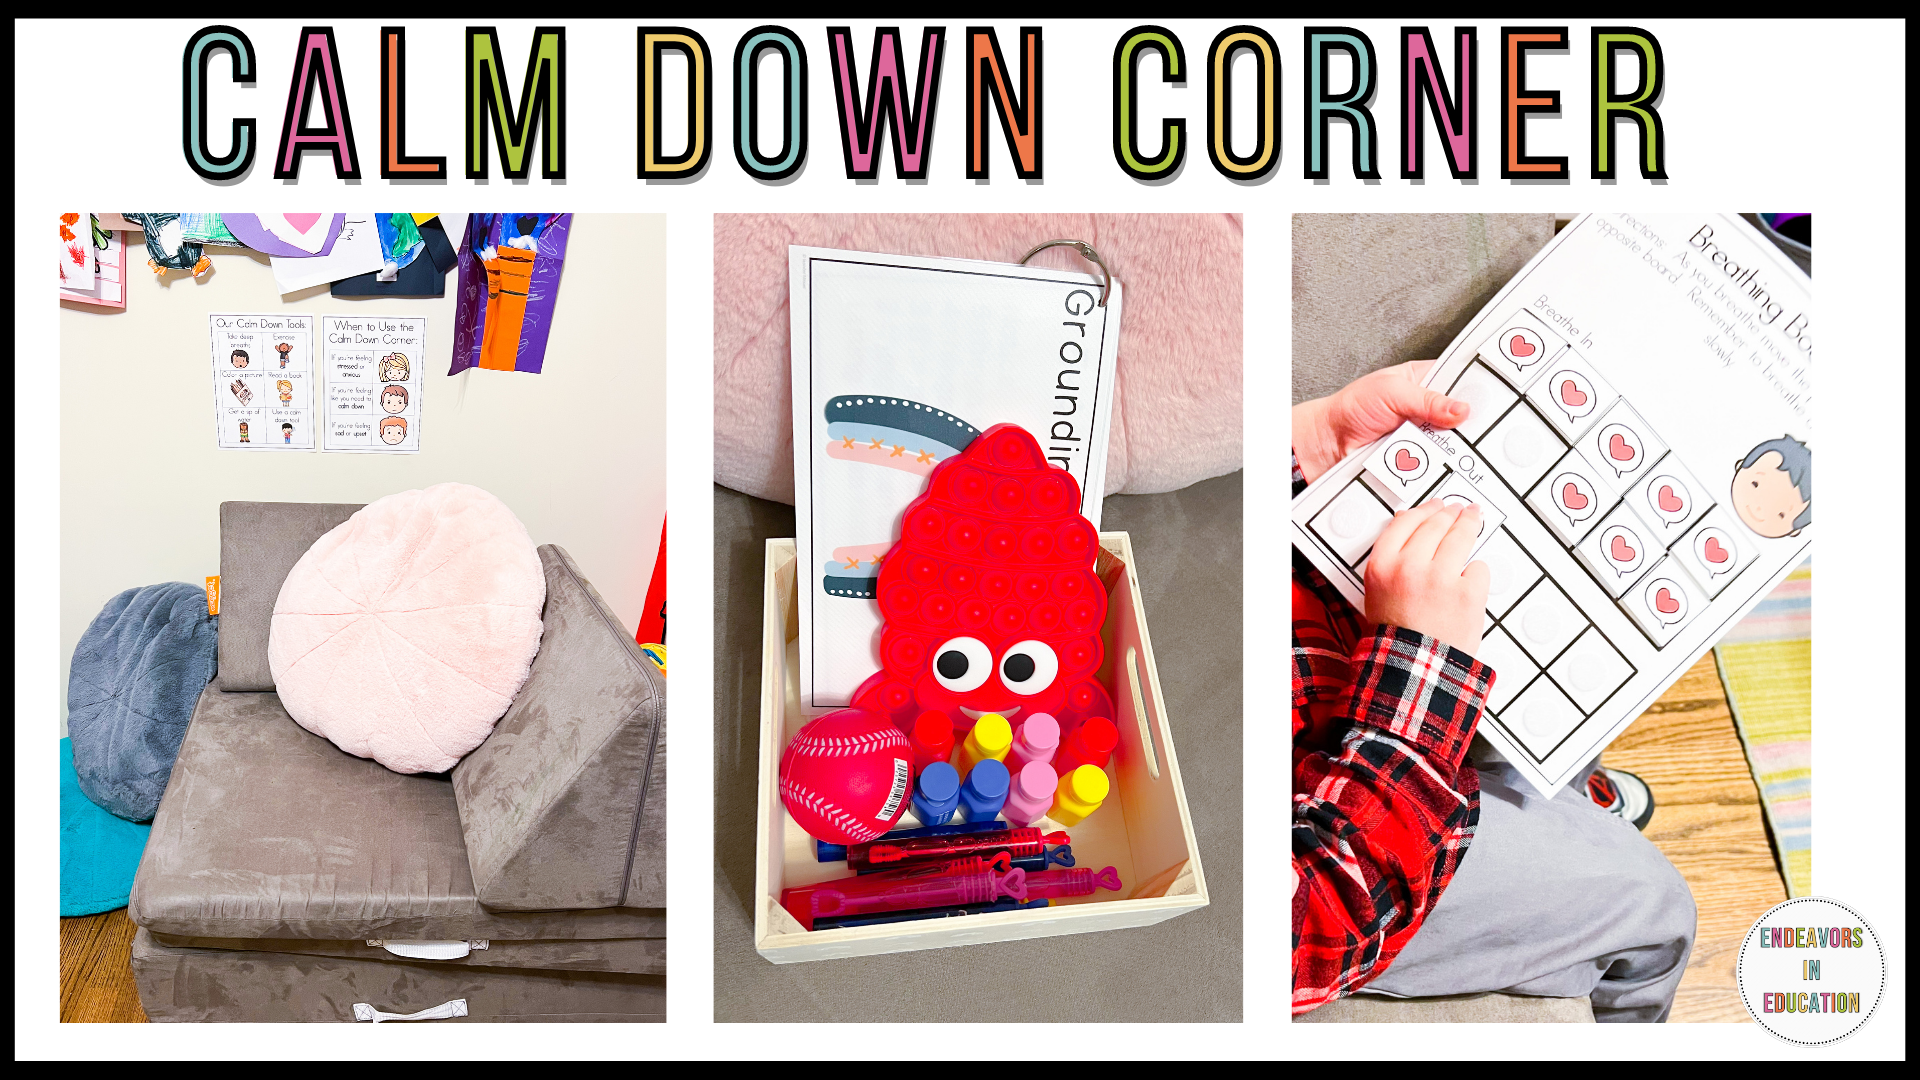 blog header image with text calm down corner over images from the blog post of the calm down corner